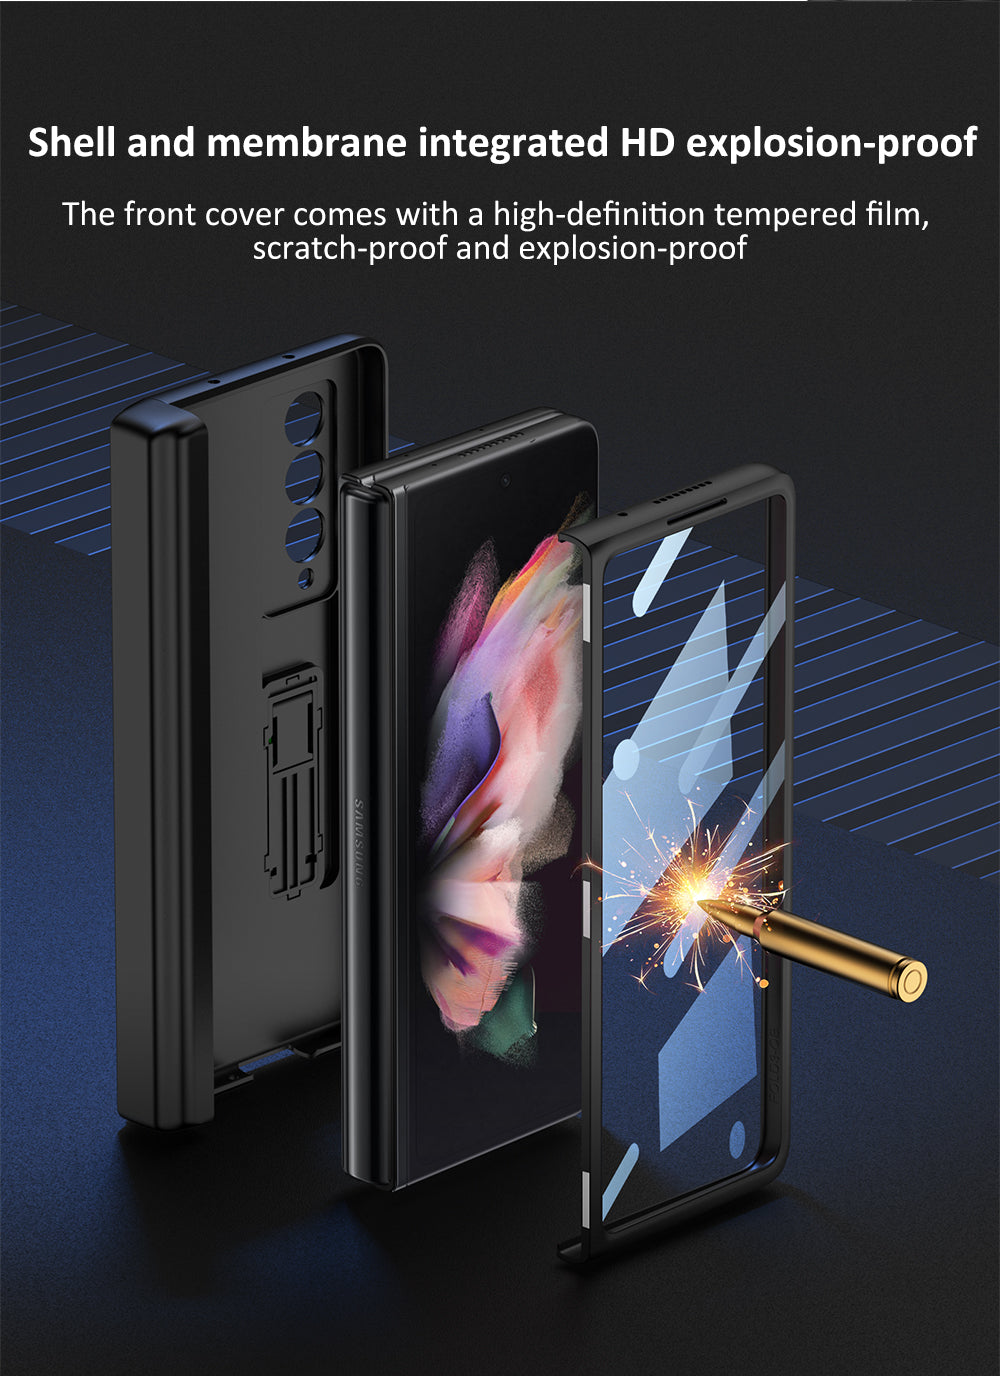 Magnetic Hinge Leather Case For Samsung Galaxy Z Fold 3 Case All-included Screen Tempered Glass Pen Cover For Galaxy Z Fold3